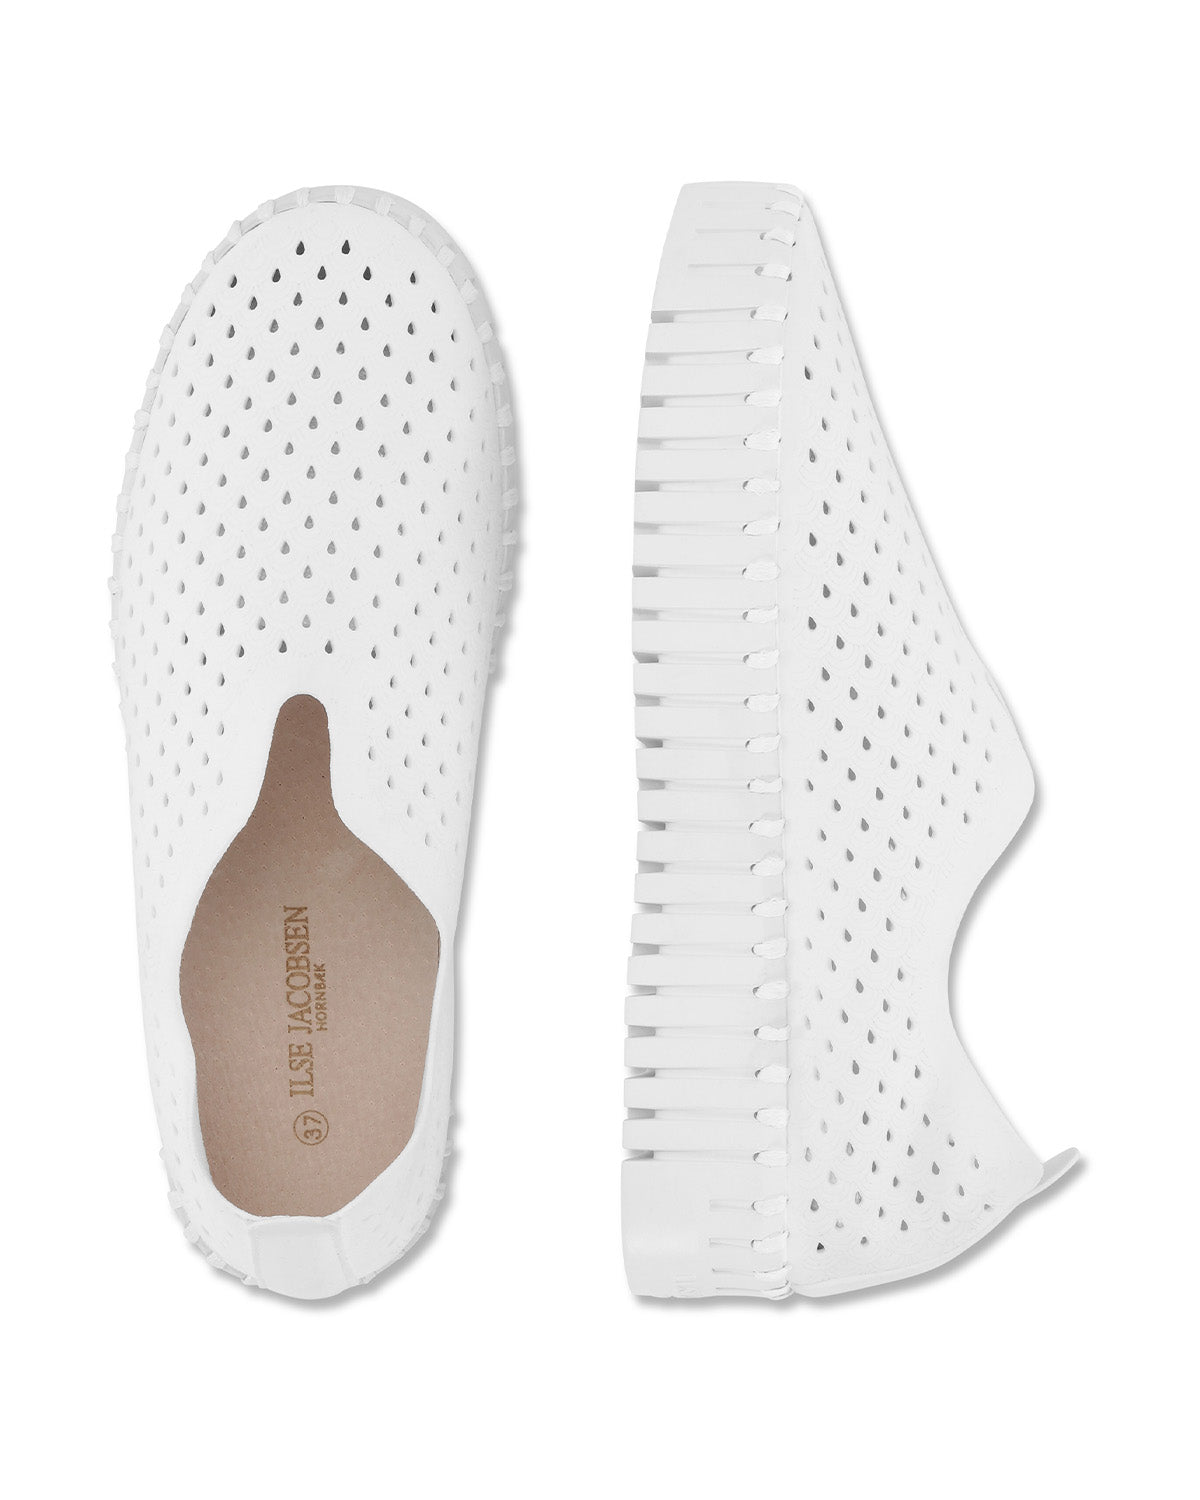 Slipper with plateau in color white by Ilse Jacobsen